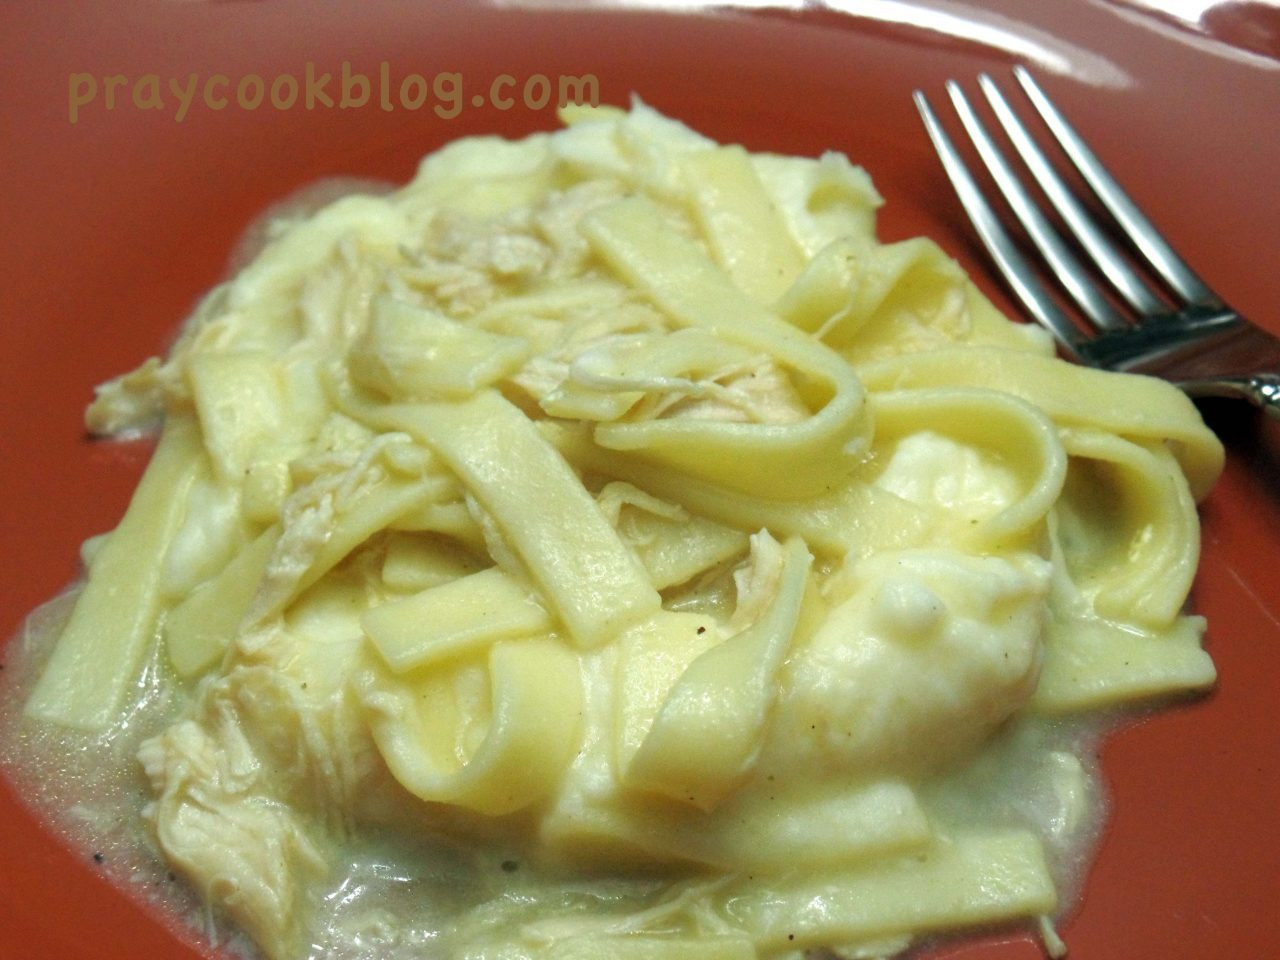 Chicken And Noodles Over Mashed Potatoes
 Easy and Delicious Homemade Chicken and Noodles